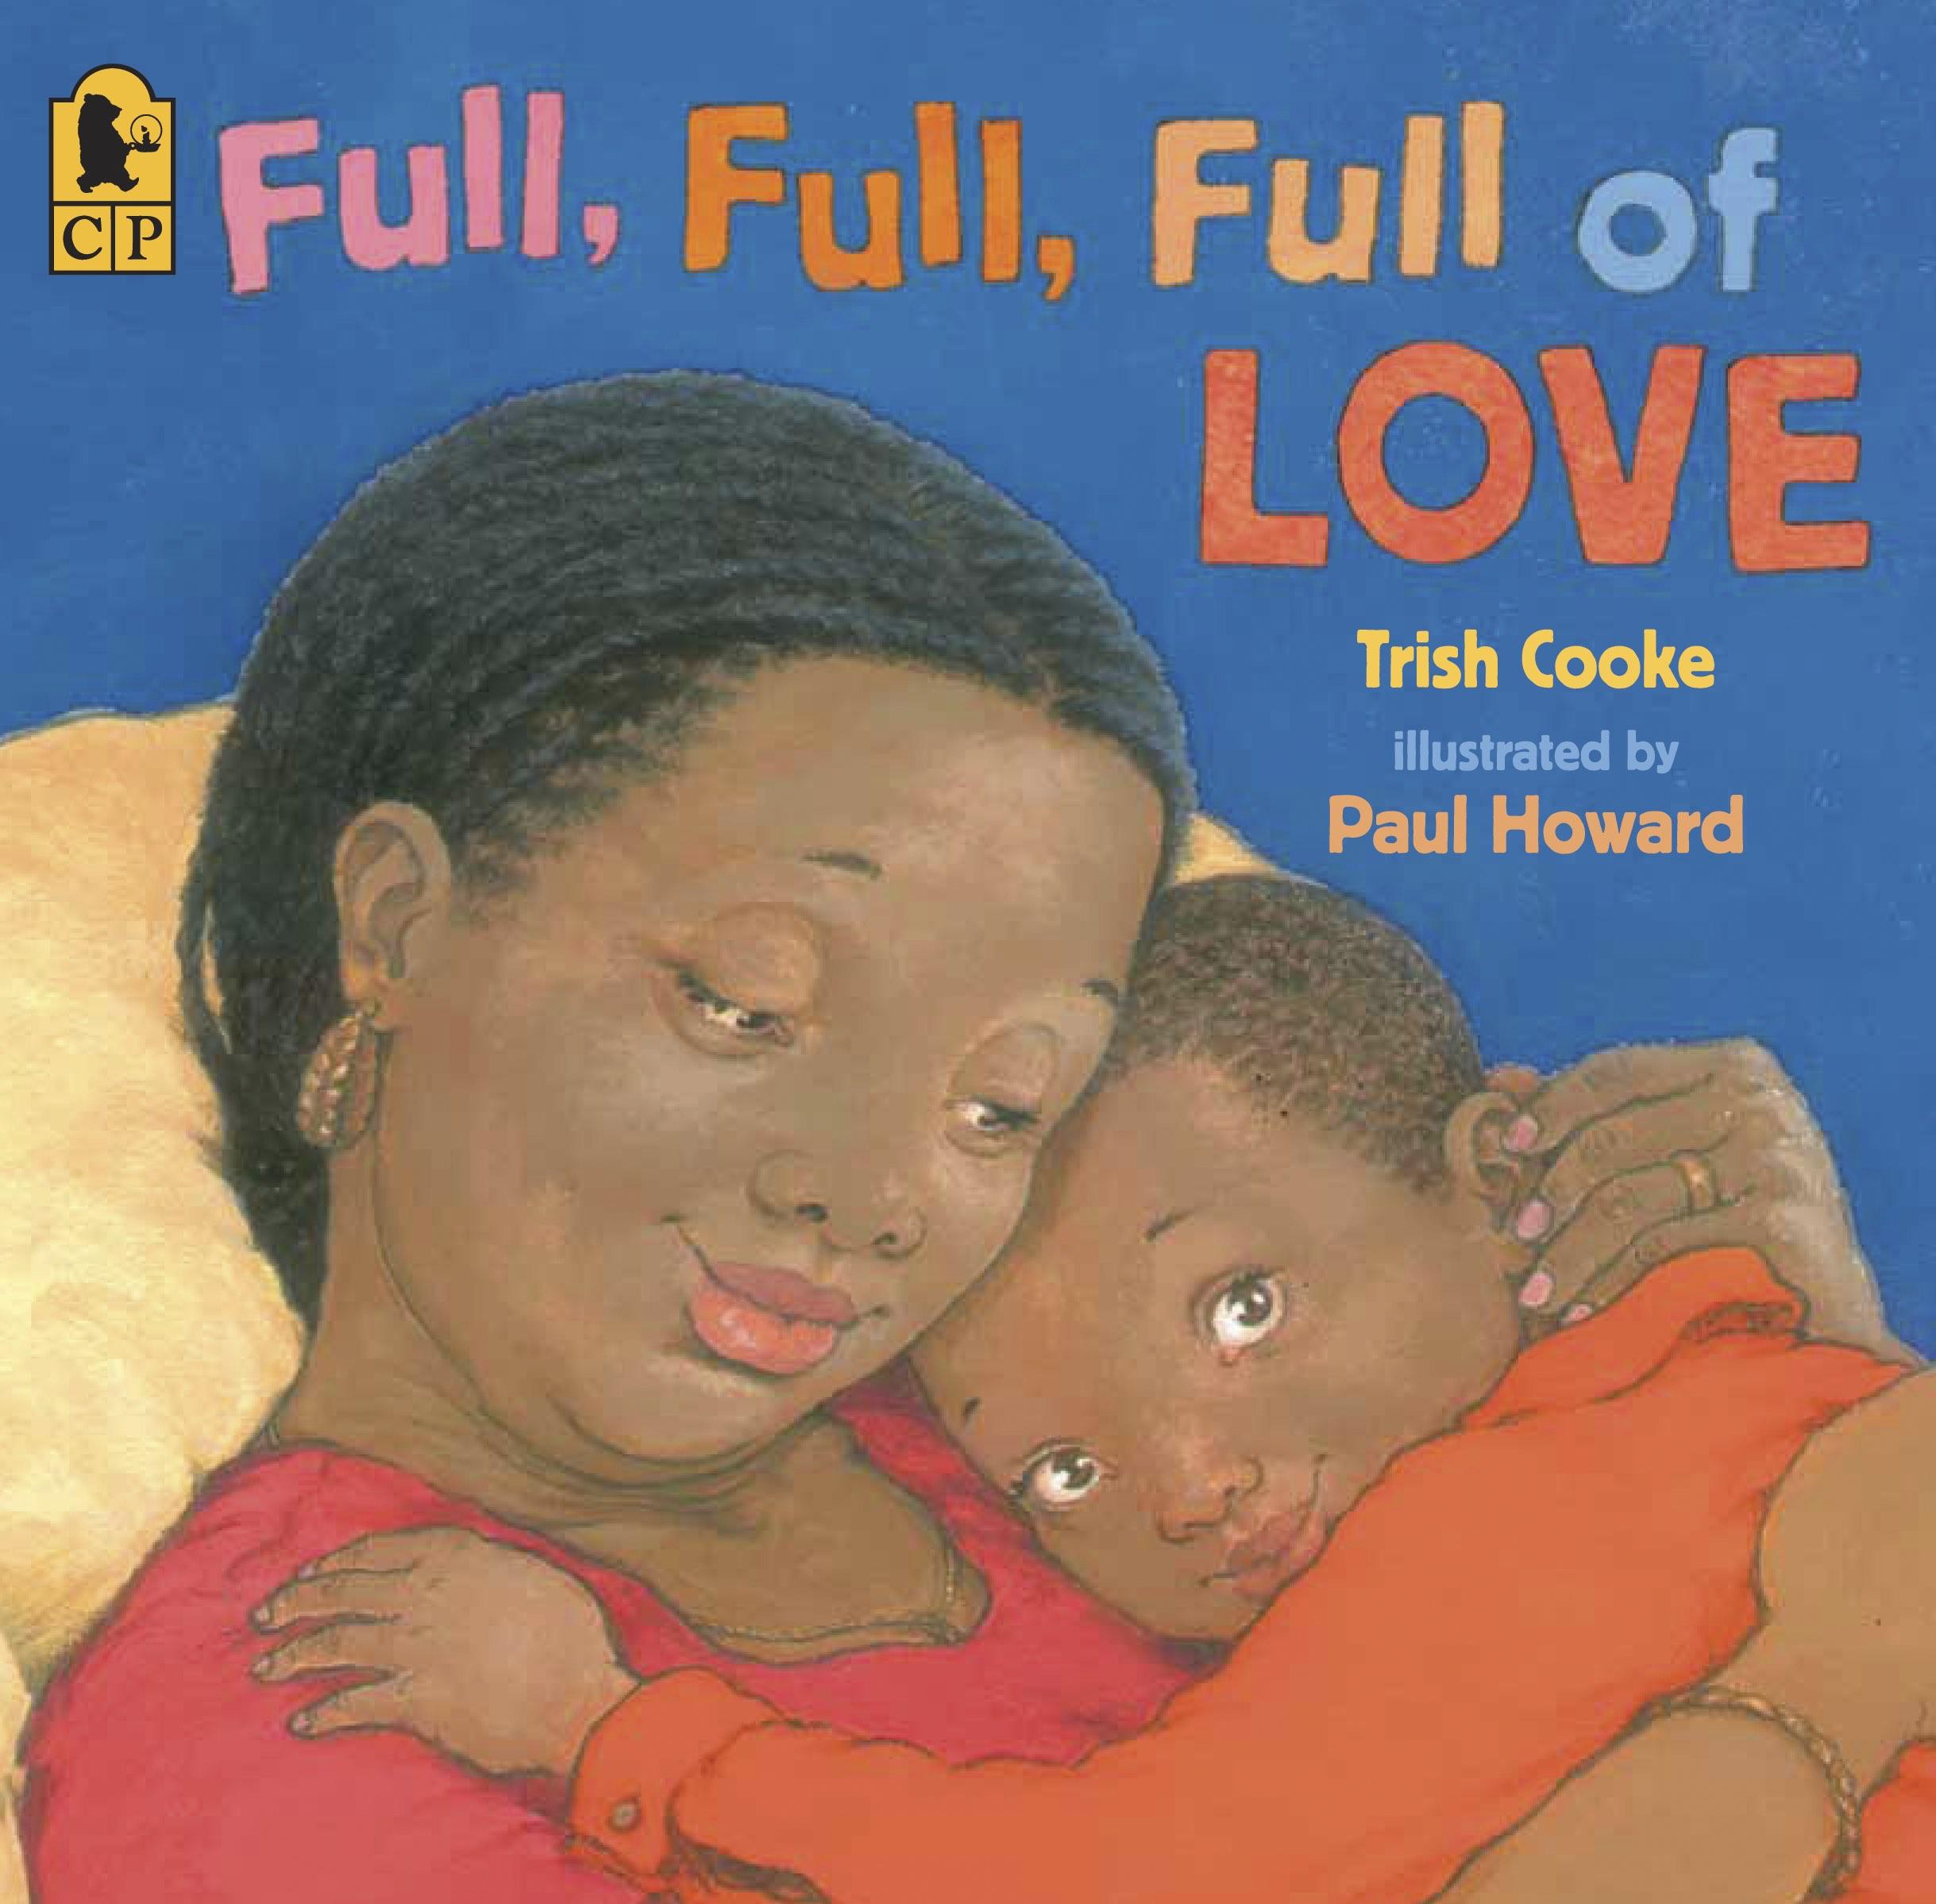 book cover image of full, full, full of love, illustrated mother with baby